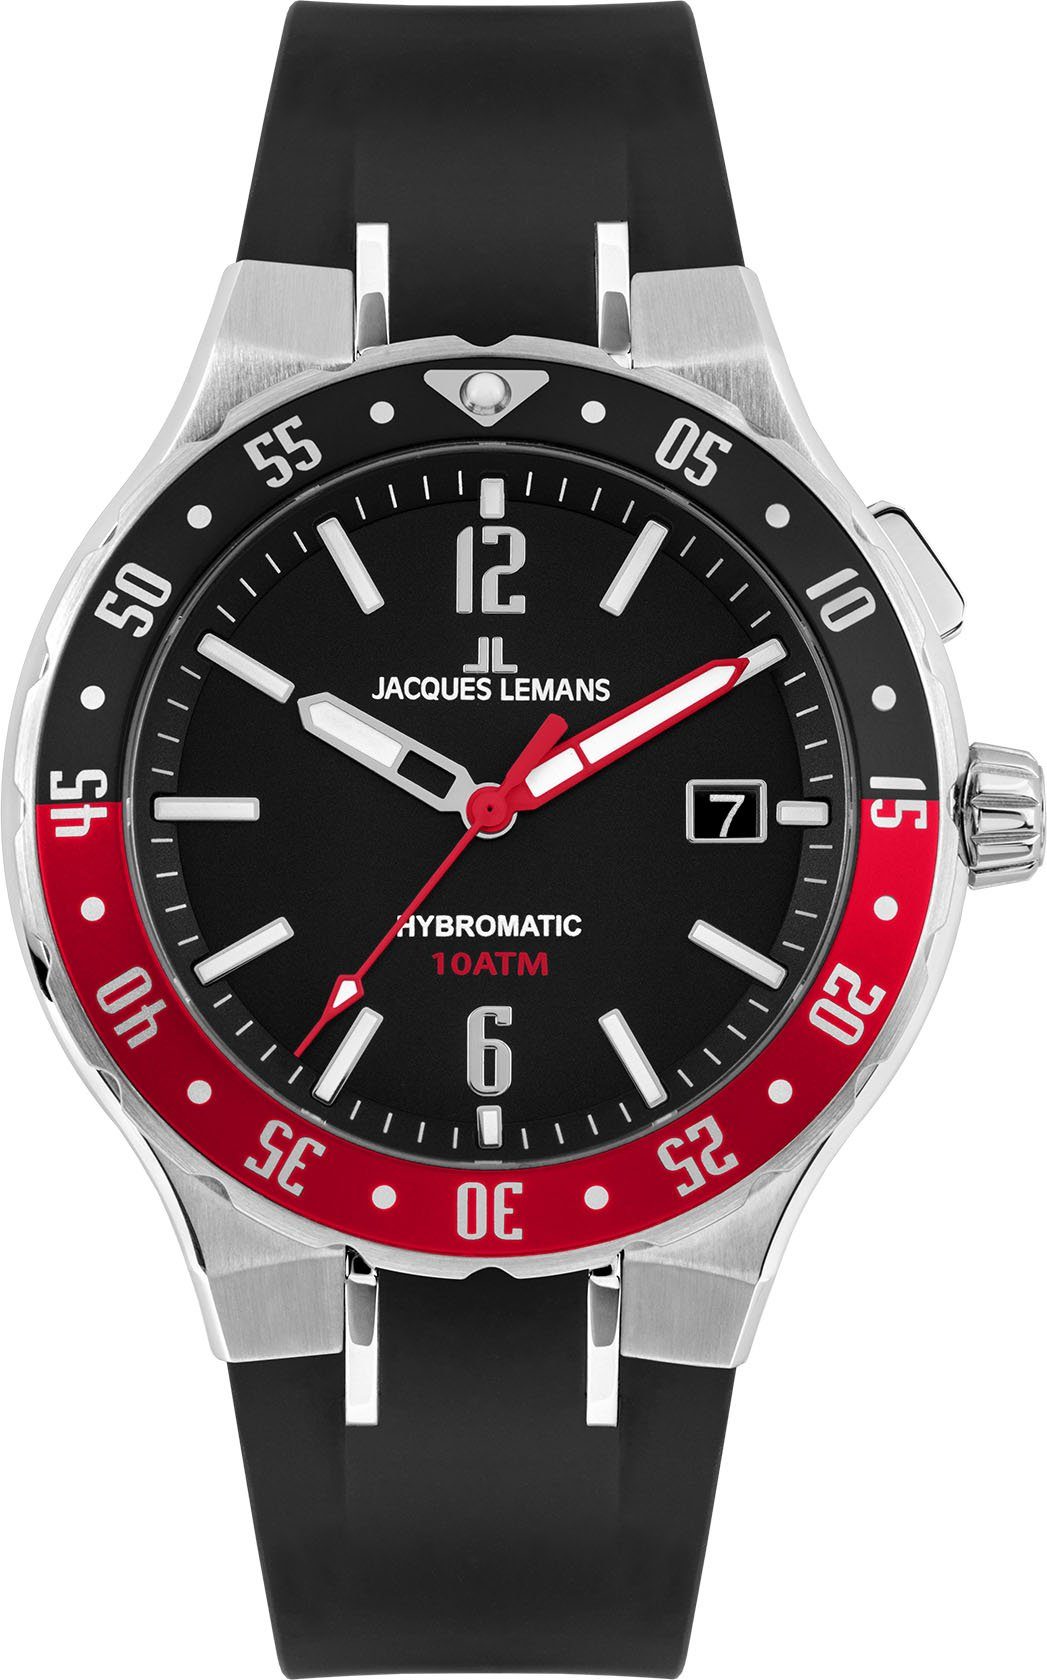 Jacques schwarz Hybromatic, 1-2109A rot, Lemans Kineticuhr